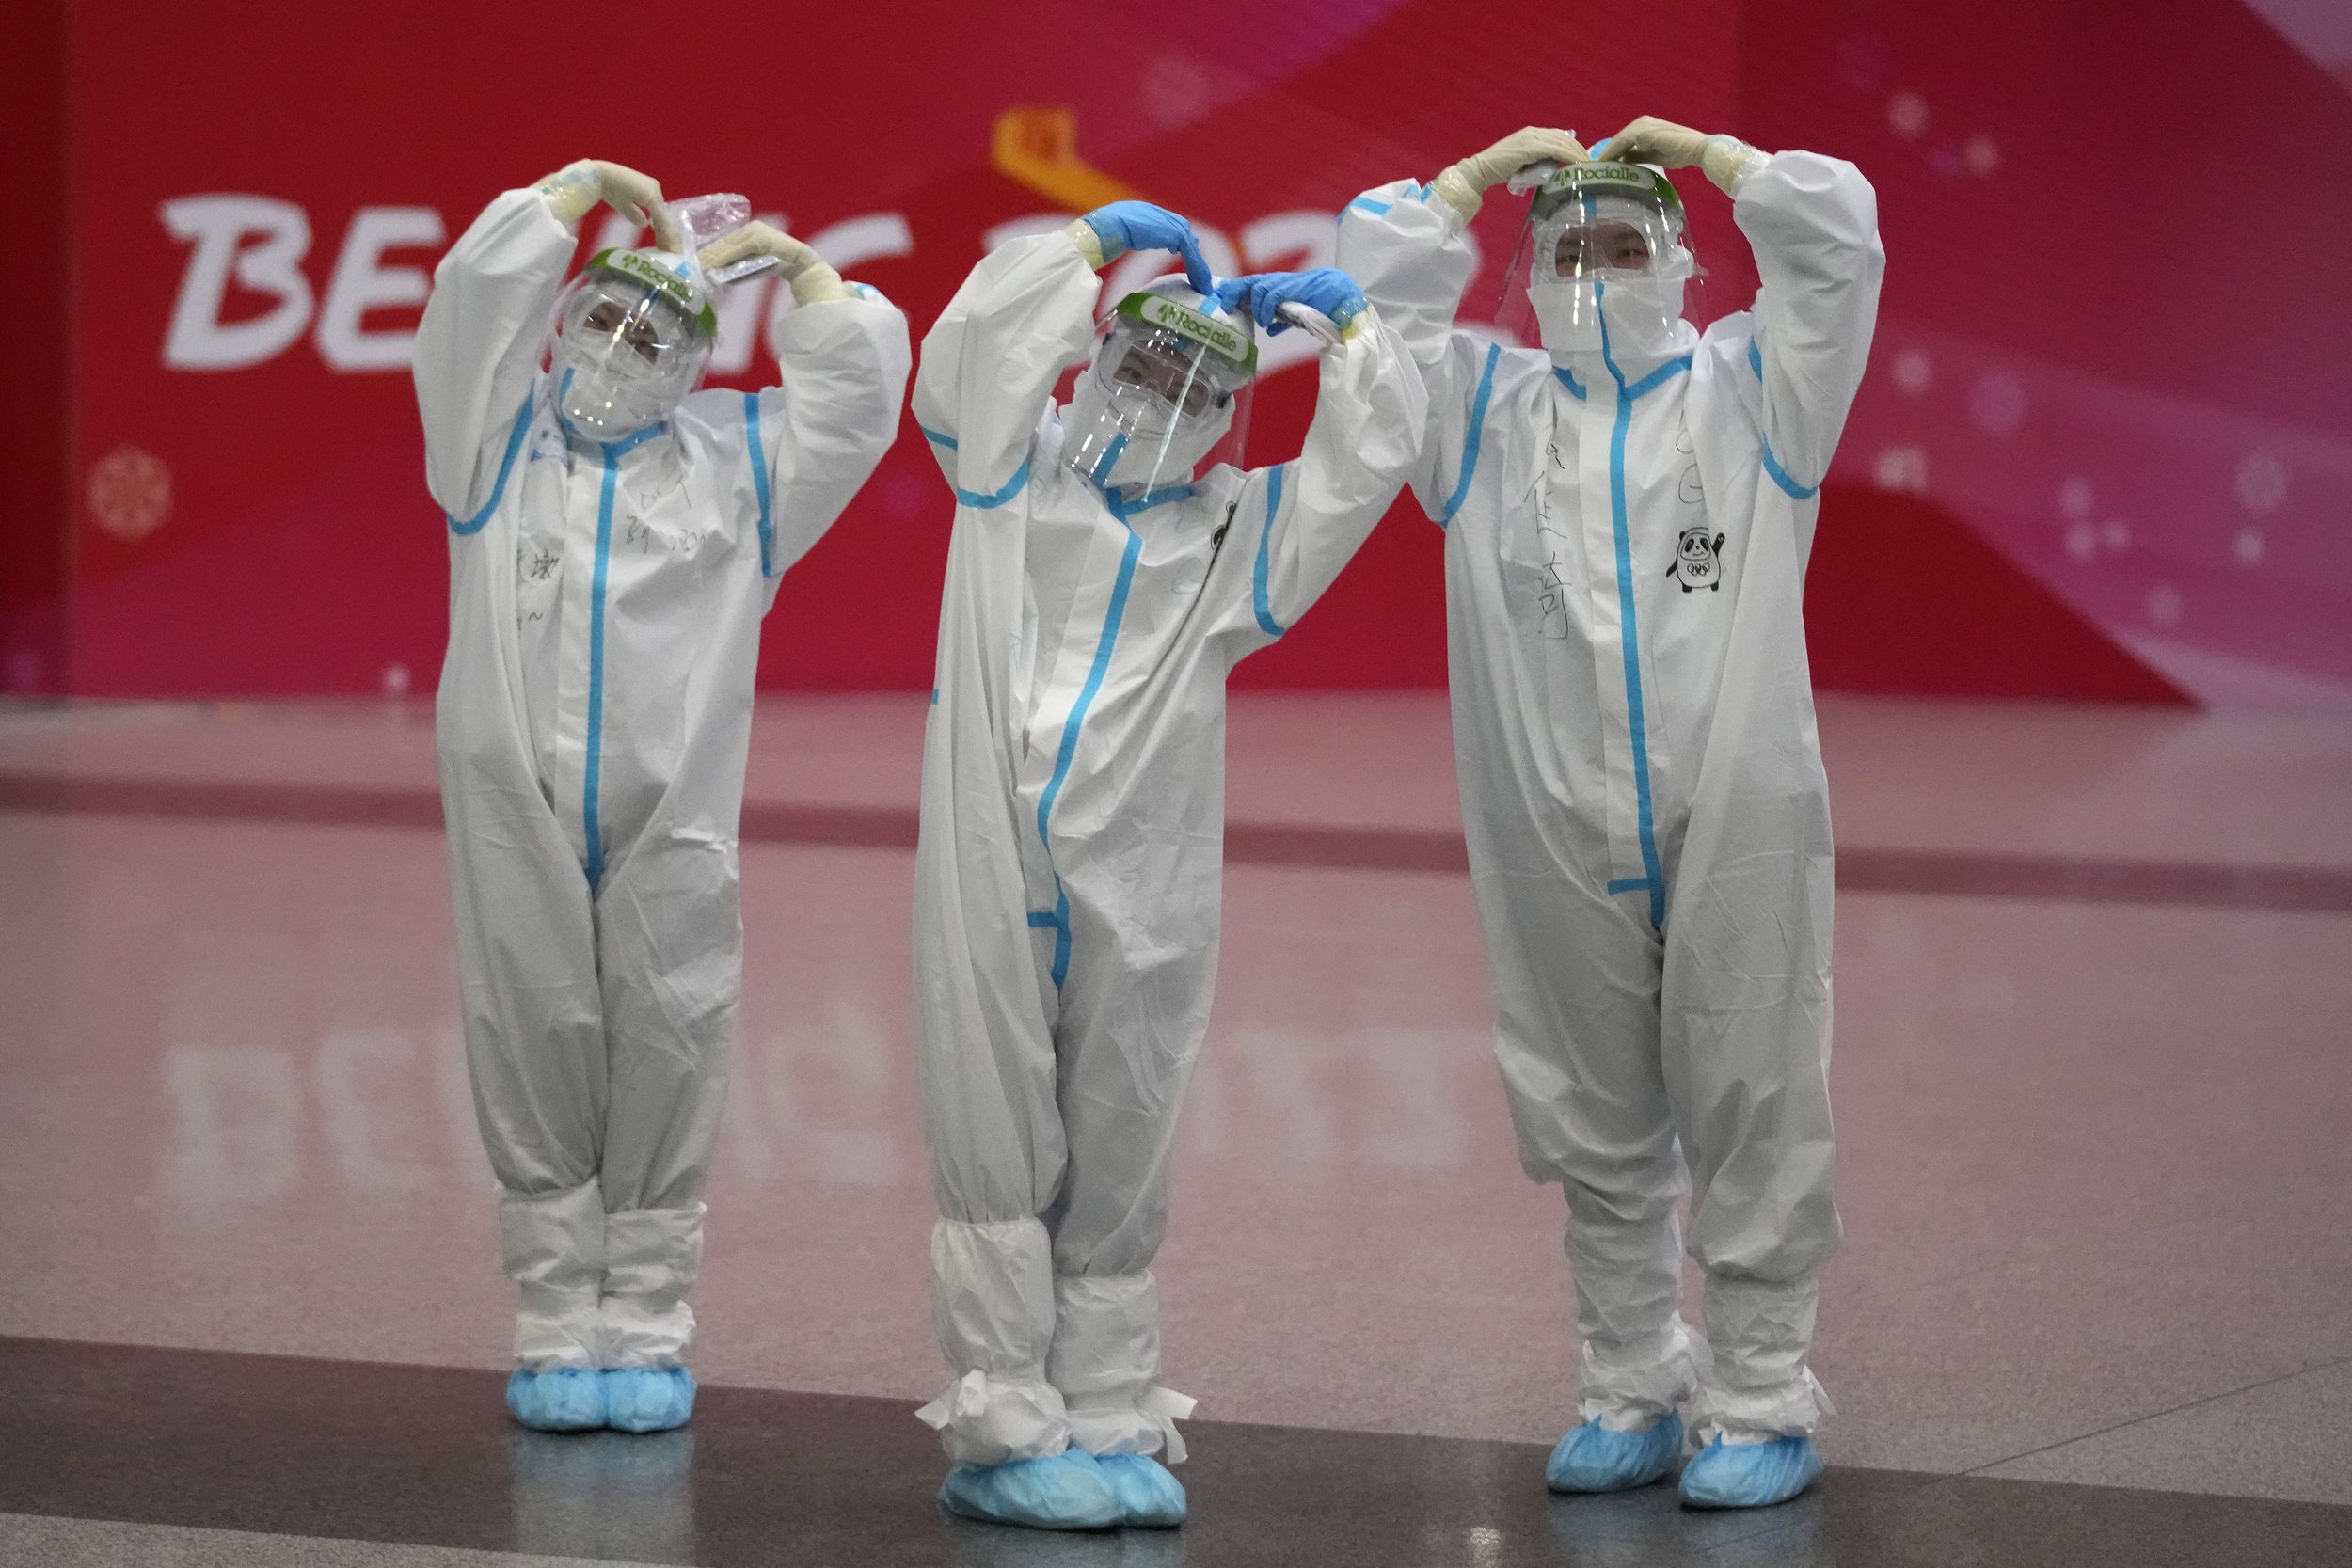  Olympic workers in protective clothing pose for a picture at the Beijing Capital International Airport after the 2022 Winter Olympics, Monday, Feb. 21, 2022, in Beijing, China. (AP Photo/Frank Augstein) 